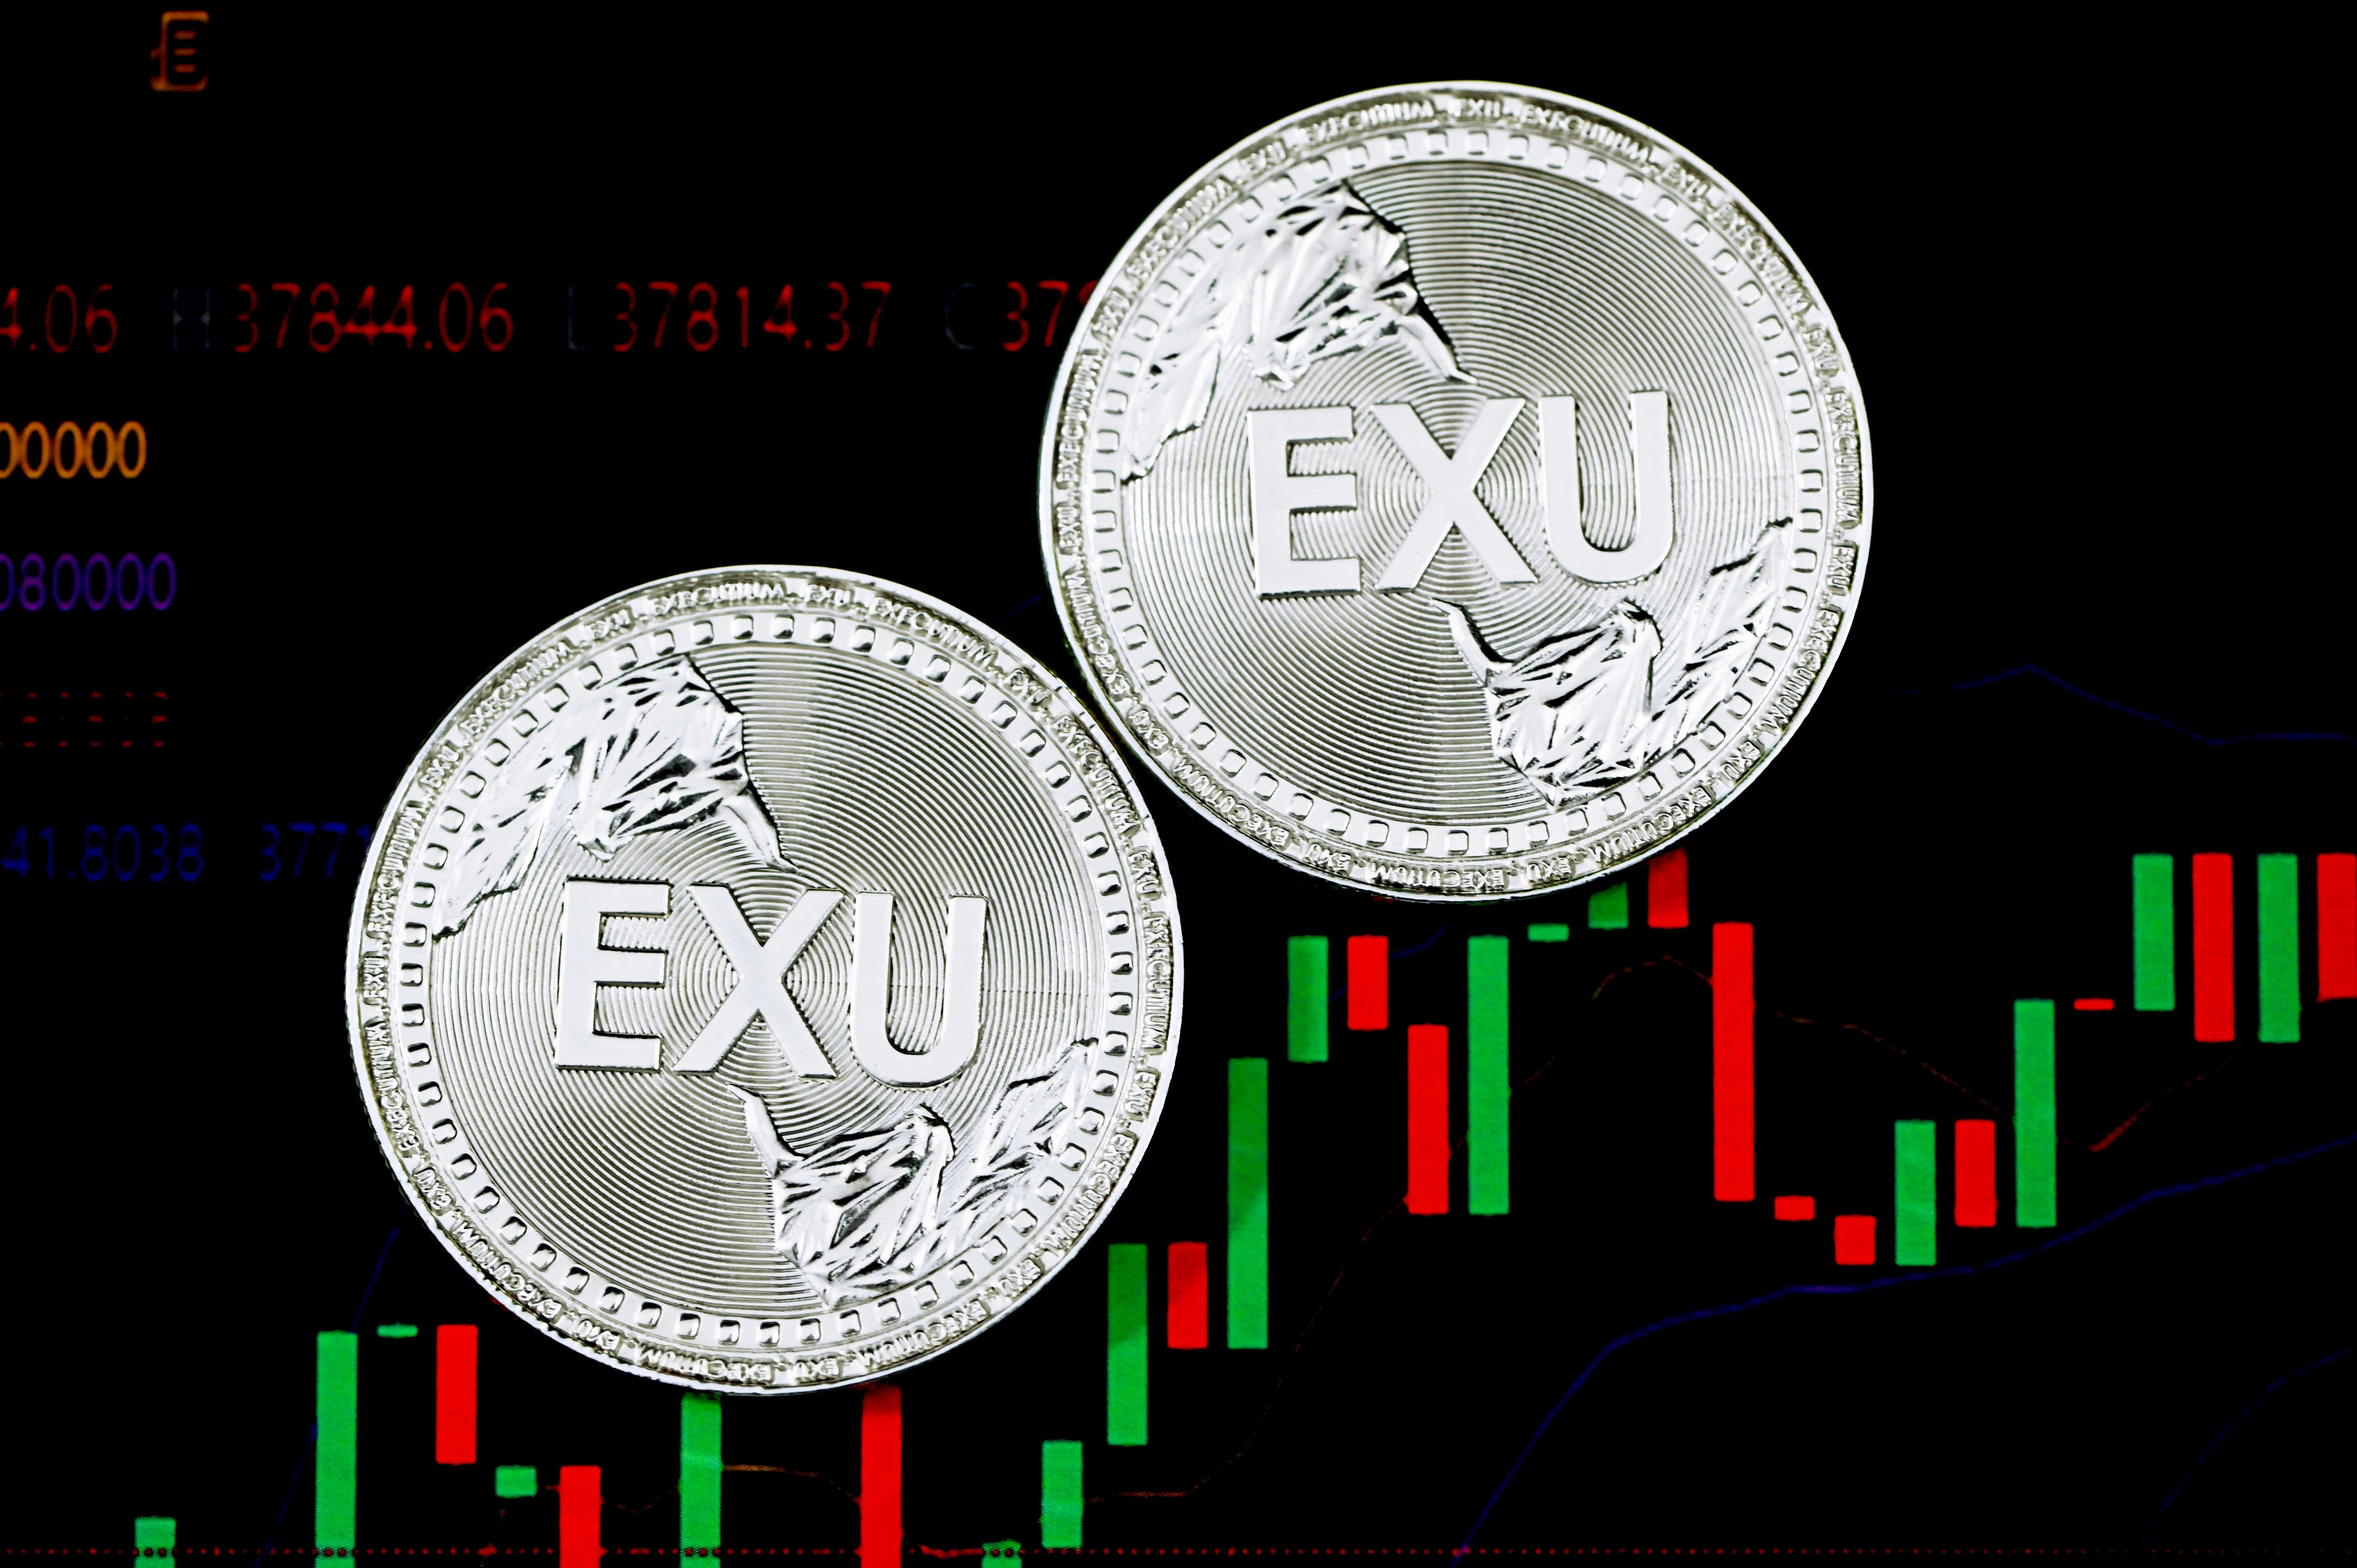 Two EXU coins on a trading chart